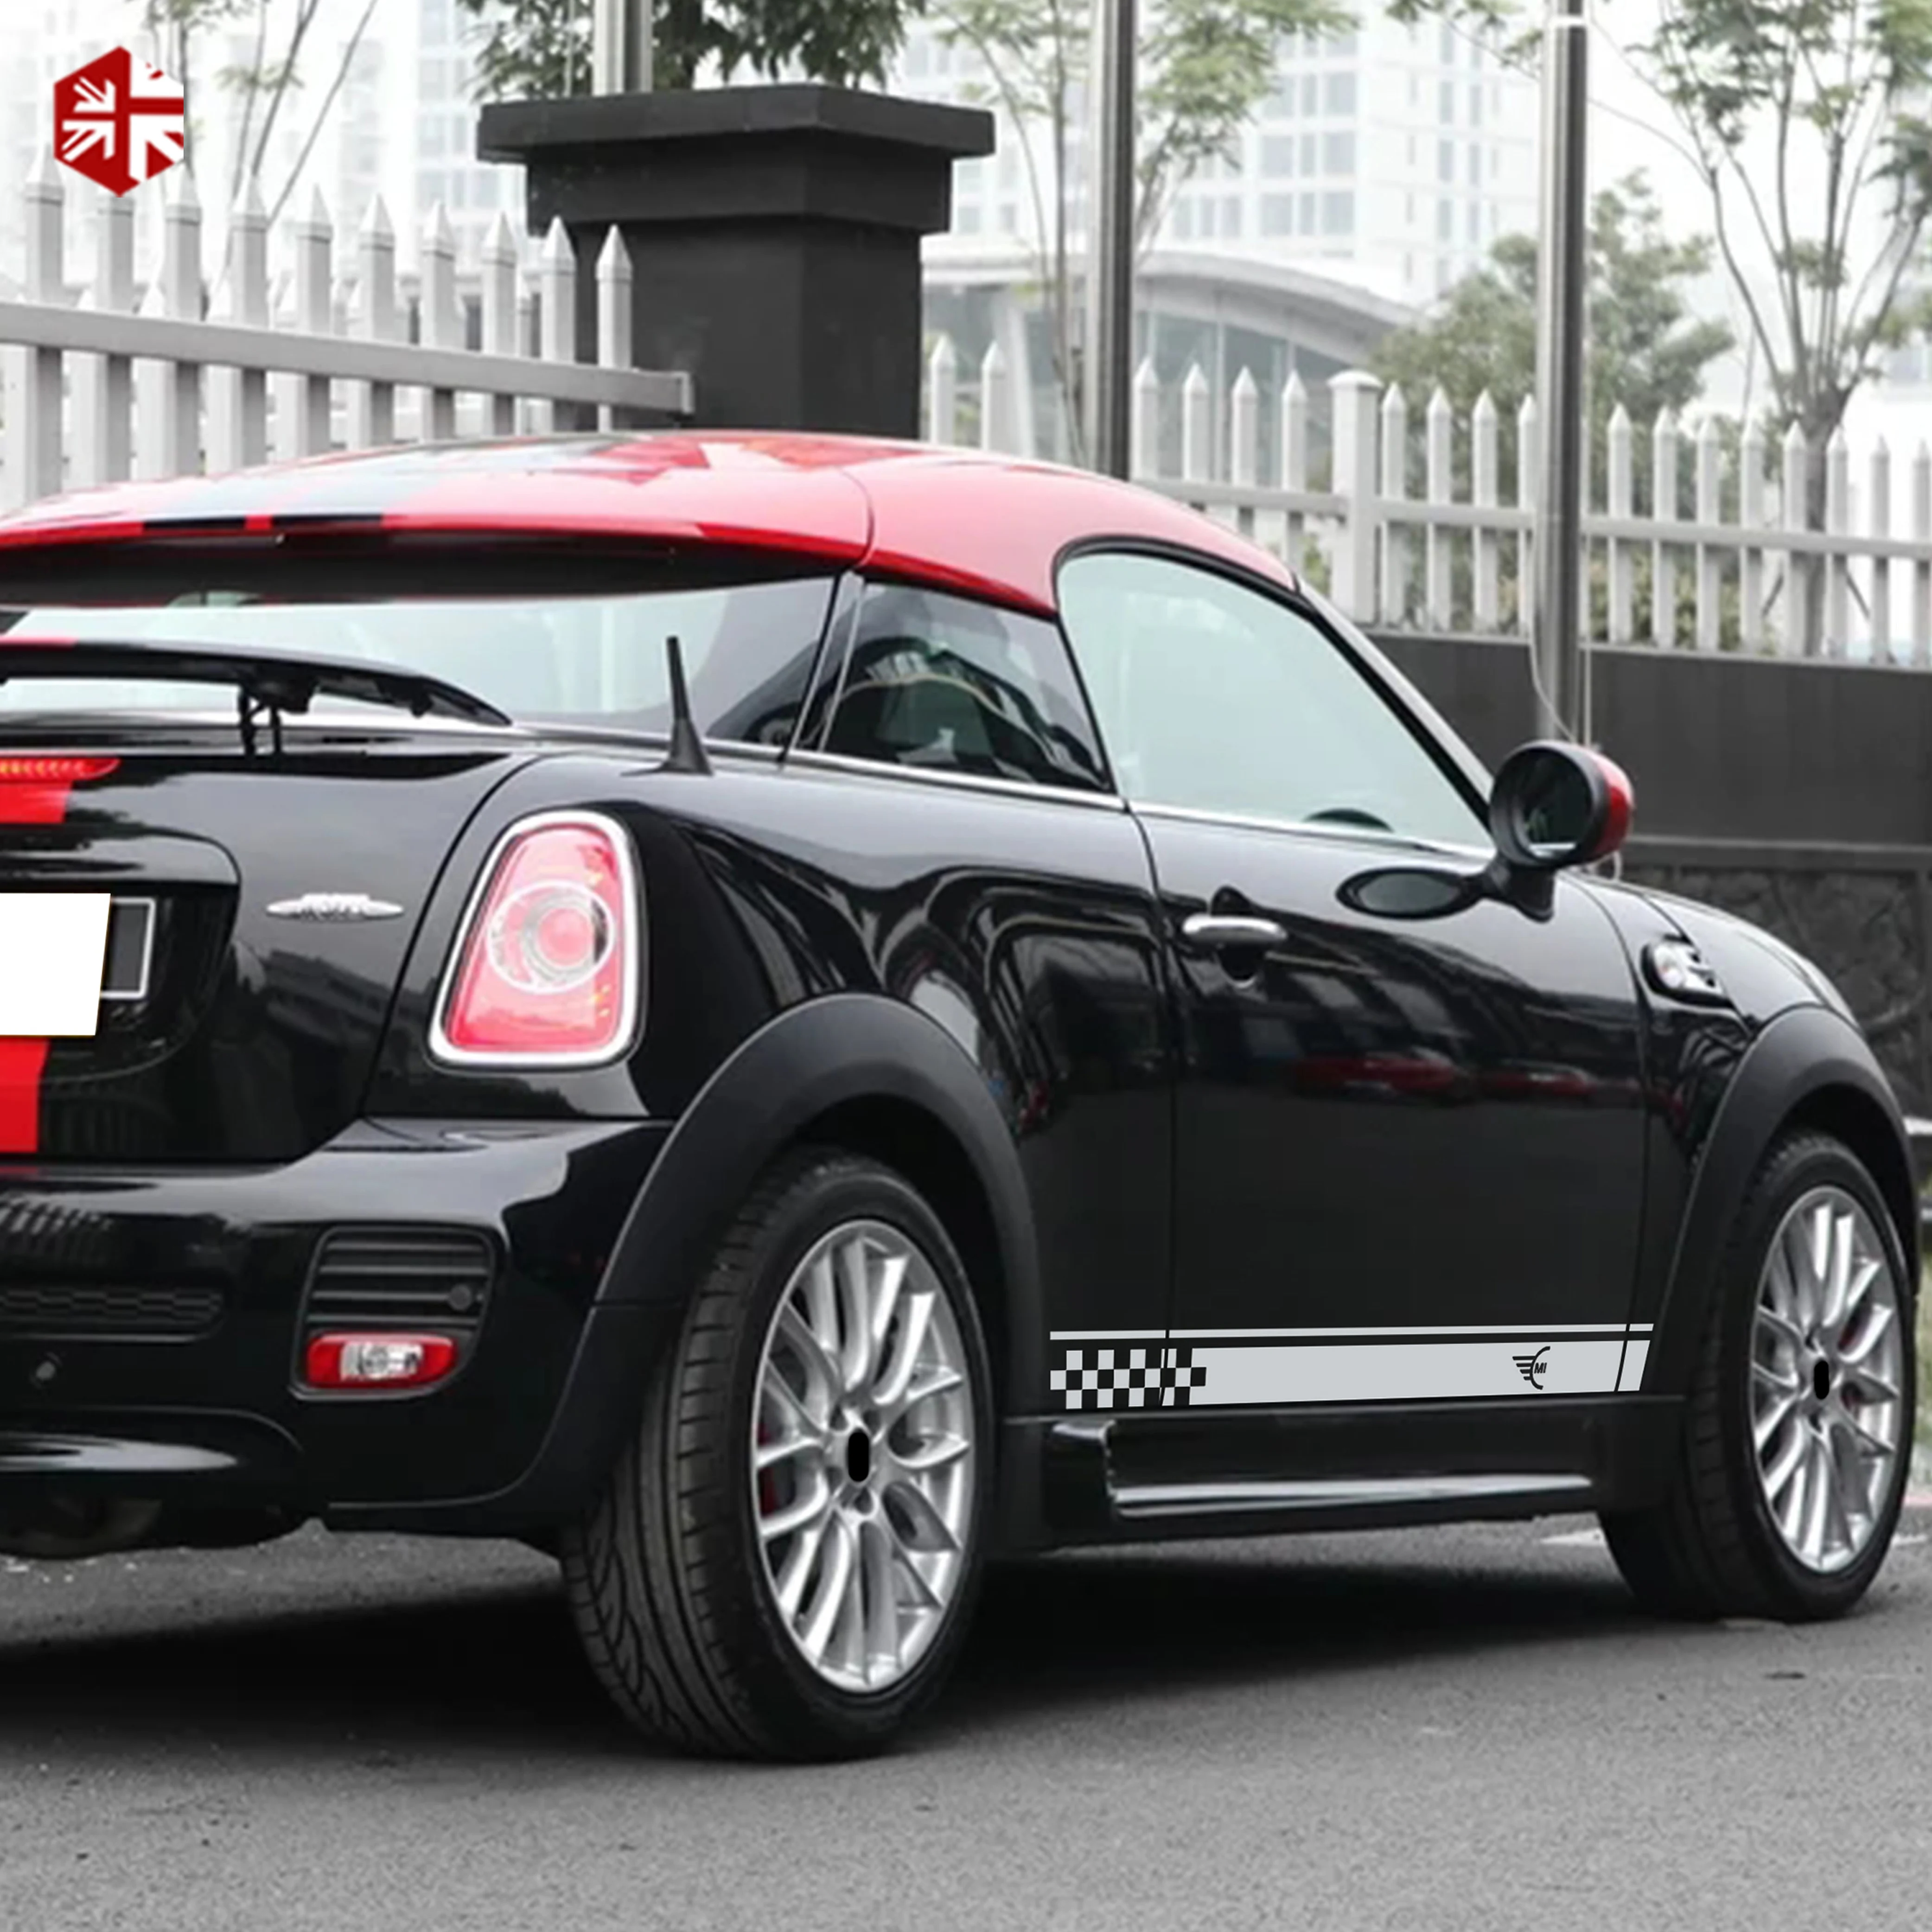 2 Pcs Car Styling MINI Logo Car Door Side Stripes Sticker Body Graphics Decal For MINI Cooper S One JCW R57 R58 R59  Accessories